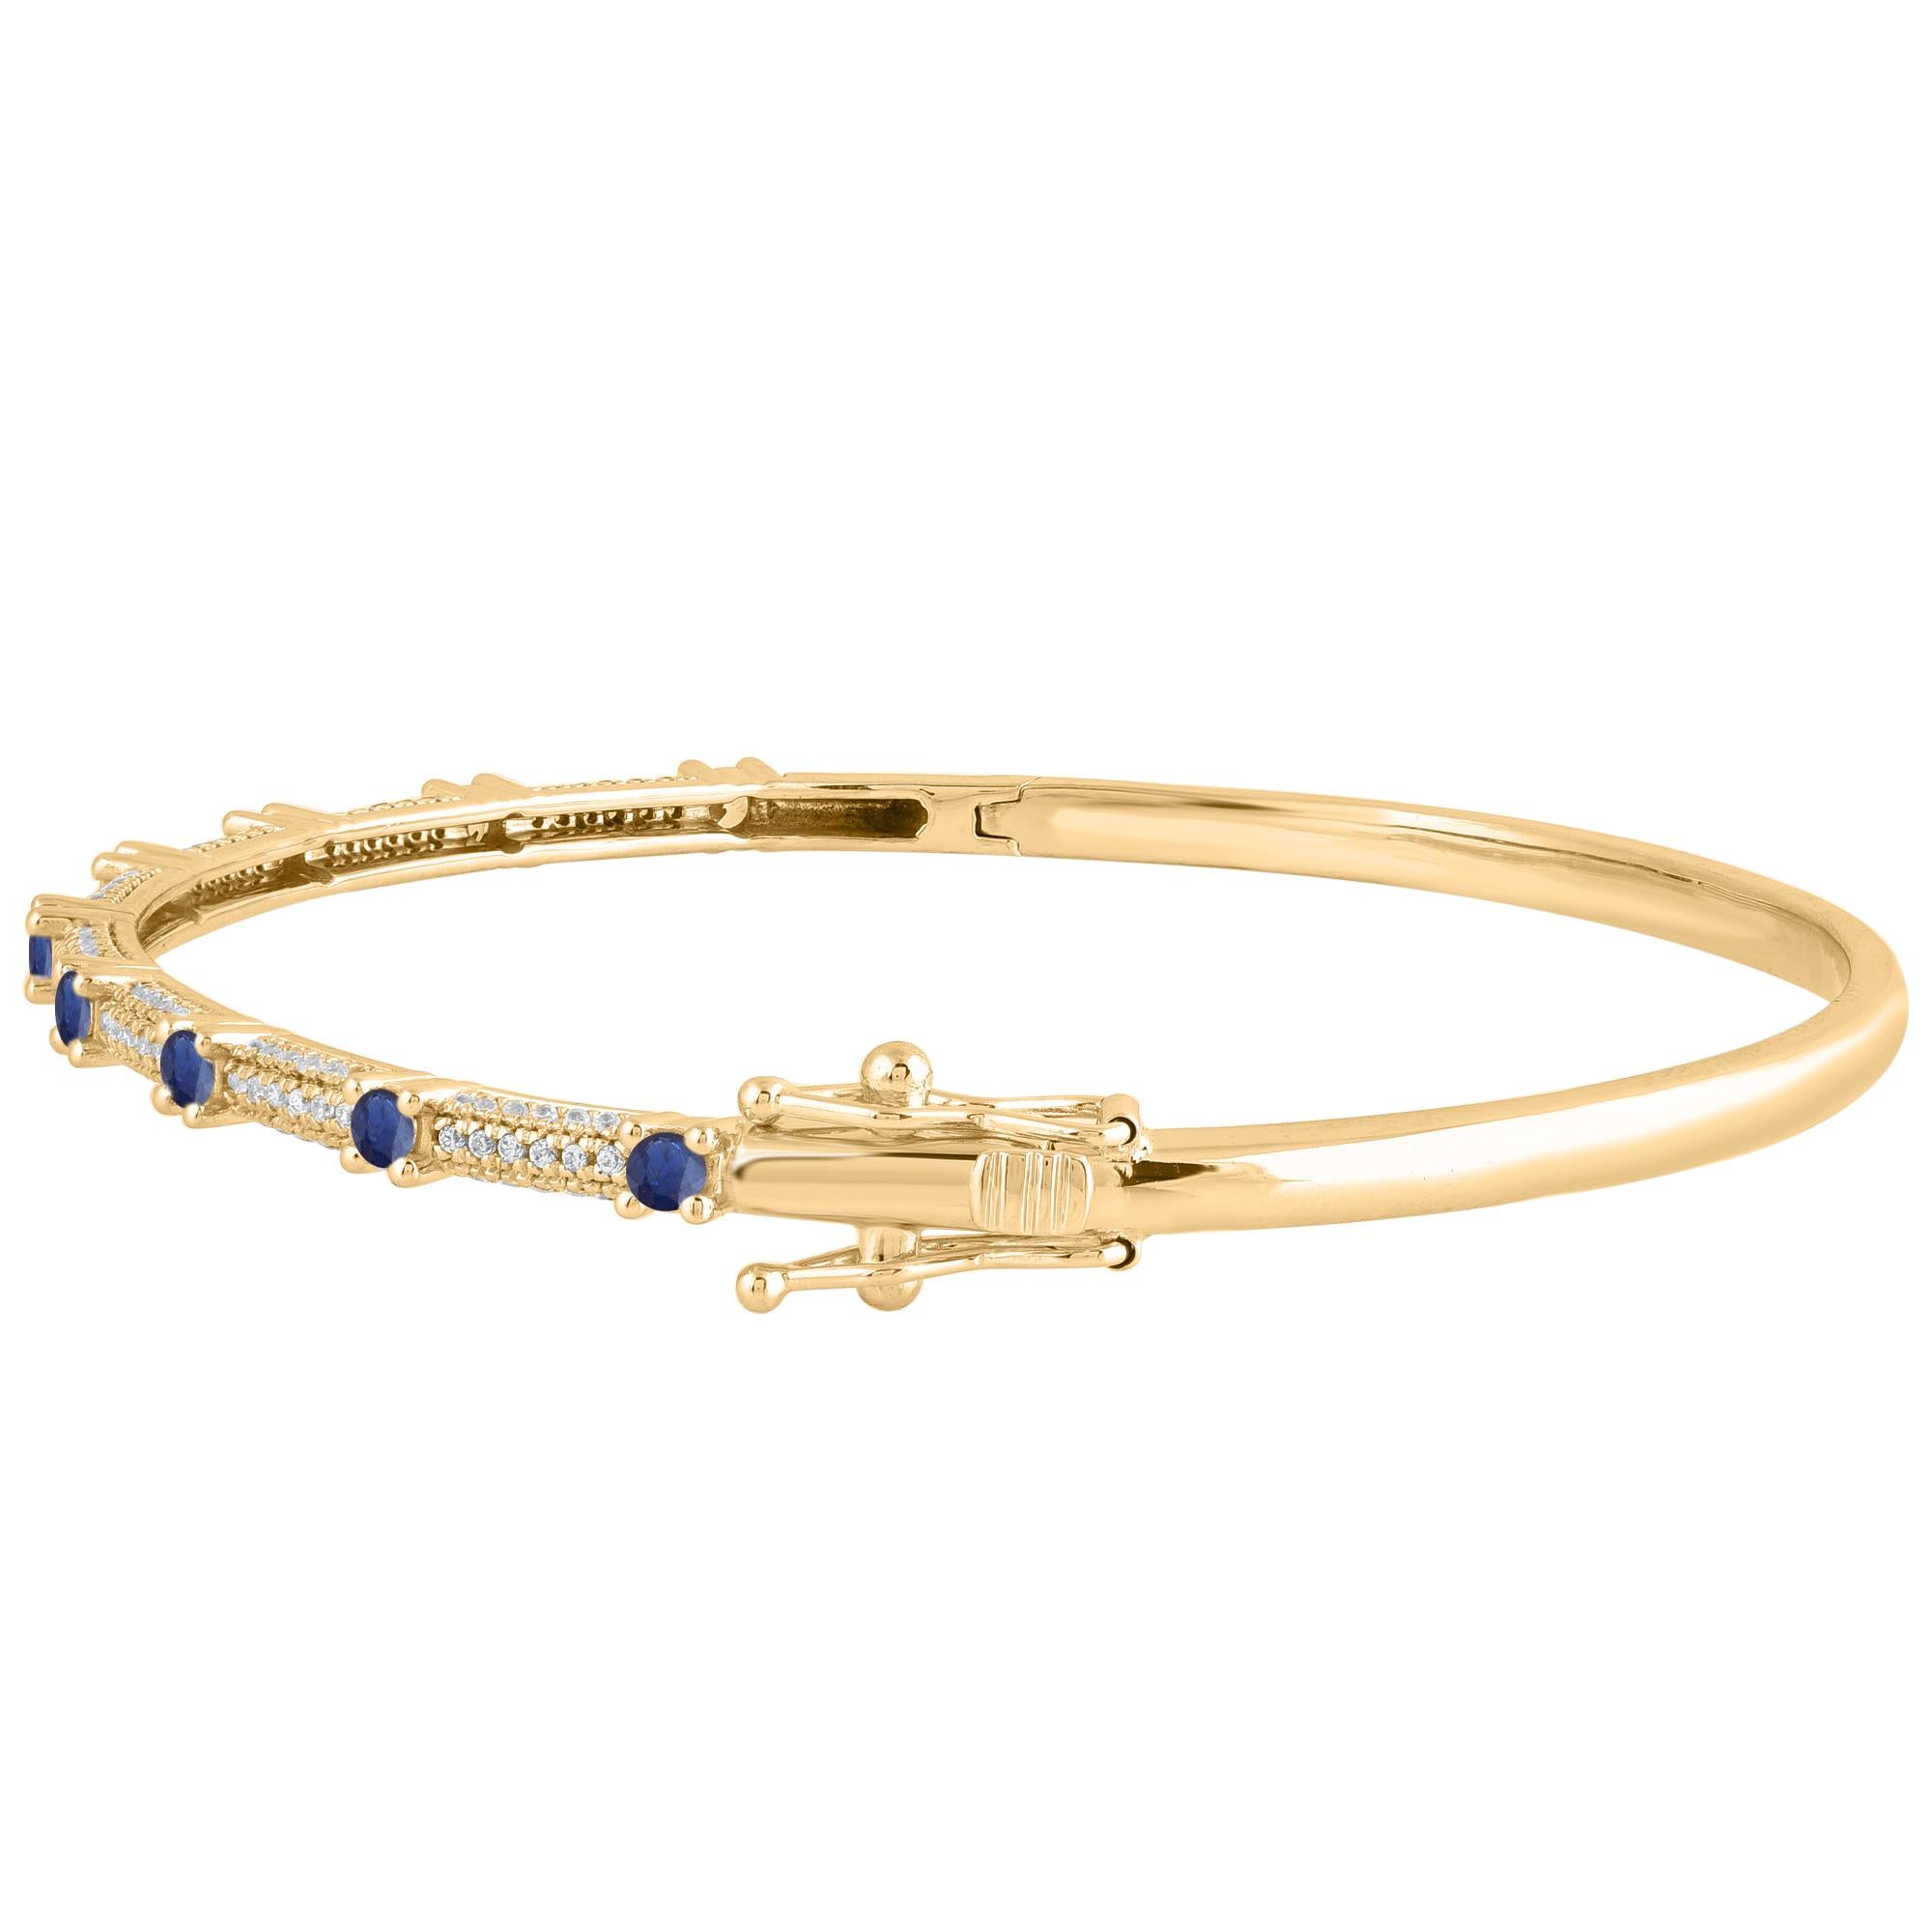 Contemporary TJD 1.0 Ct Natural Diamond and Blue Sapphire Bangle Bracelet in 14KT Yellow Gold For Sale